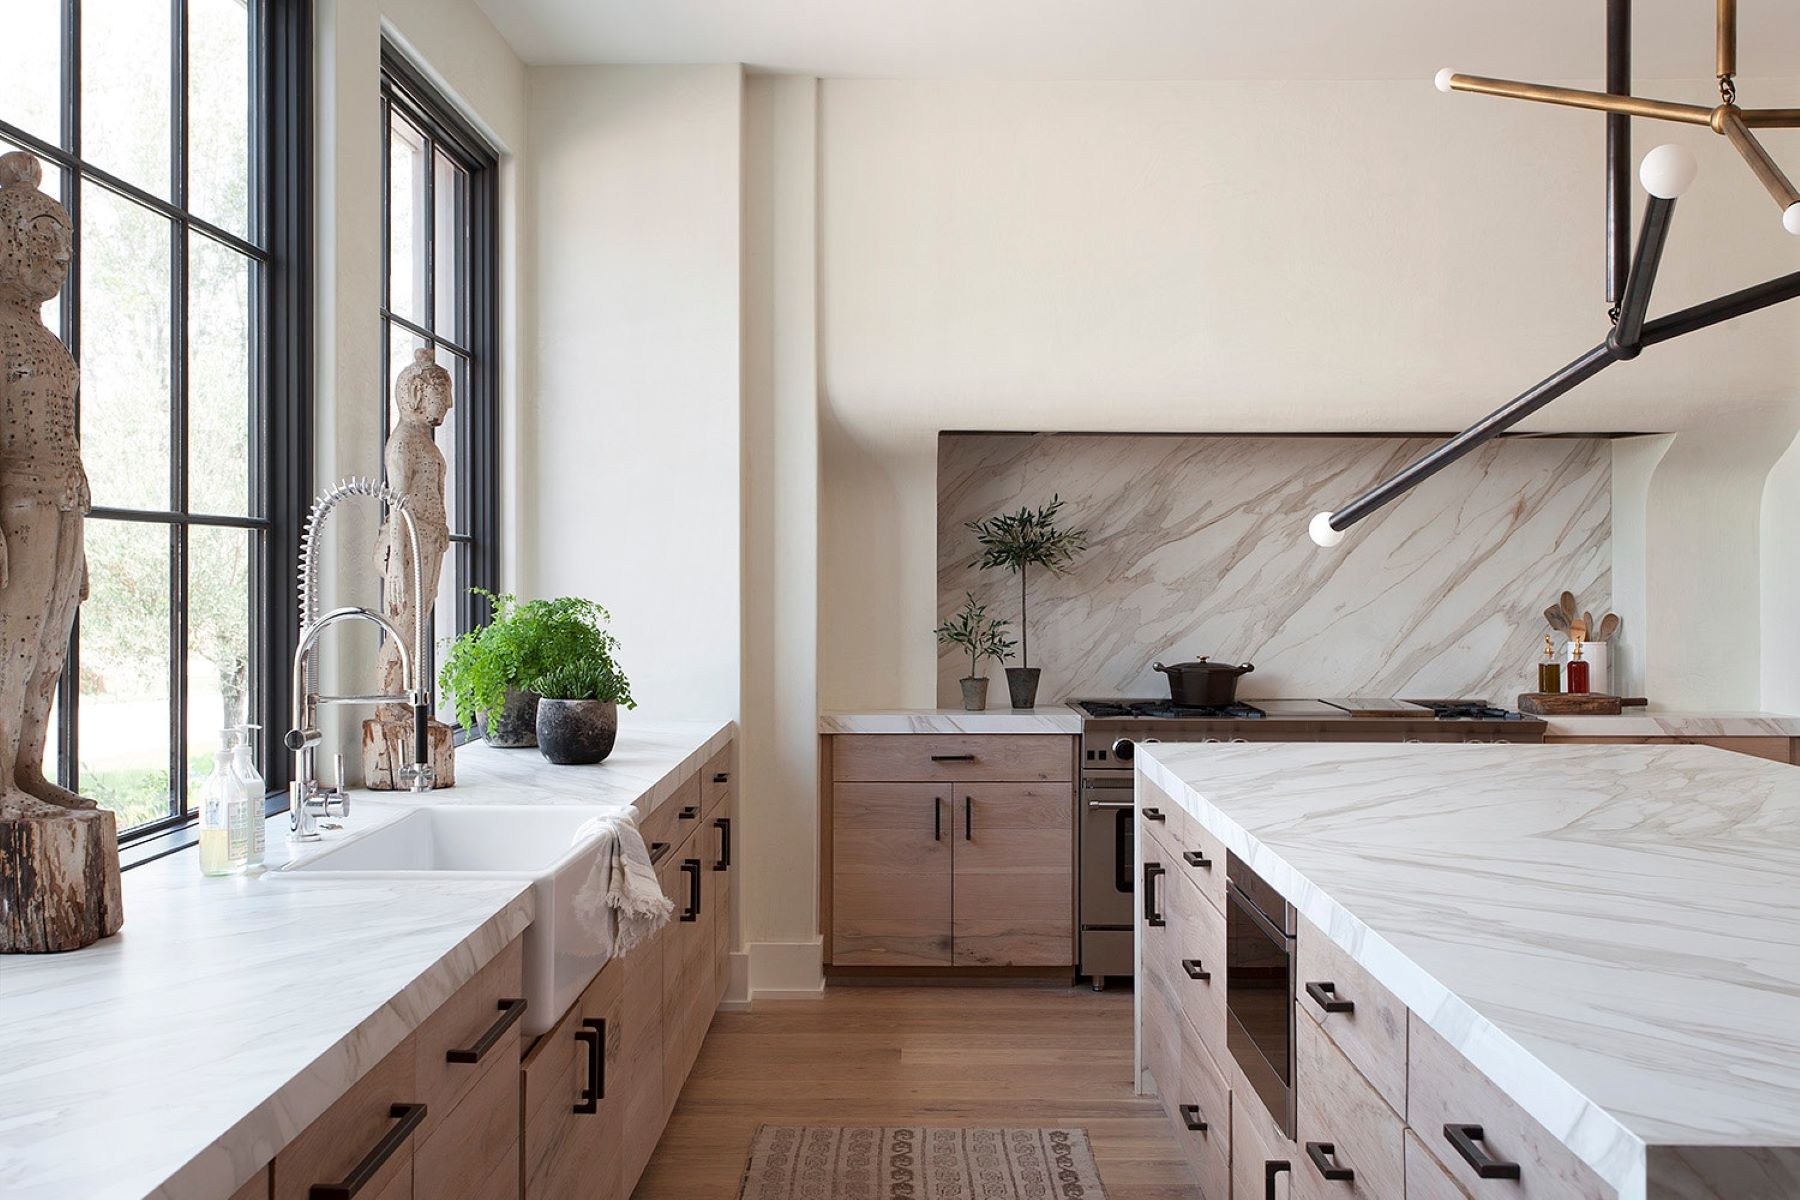 What Goes First: Countertop Or Backsplash